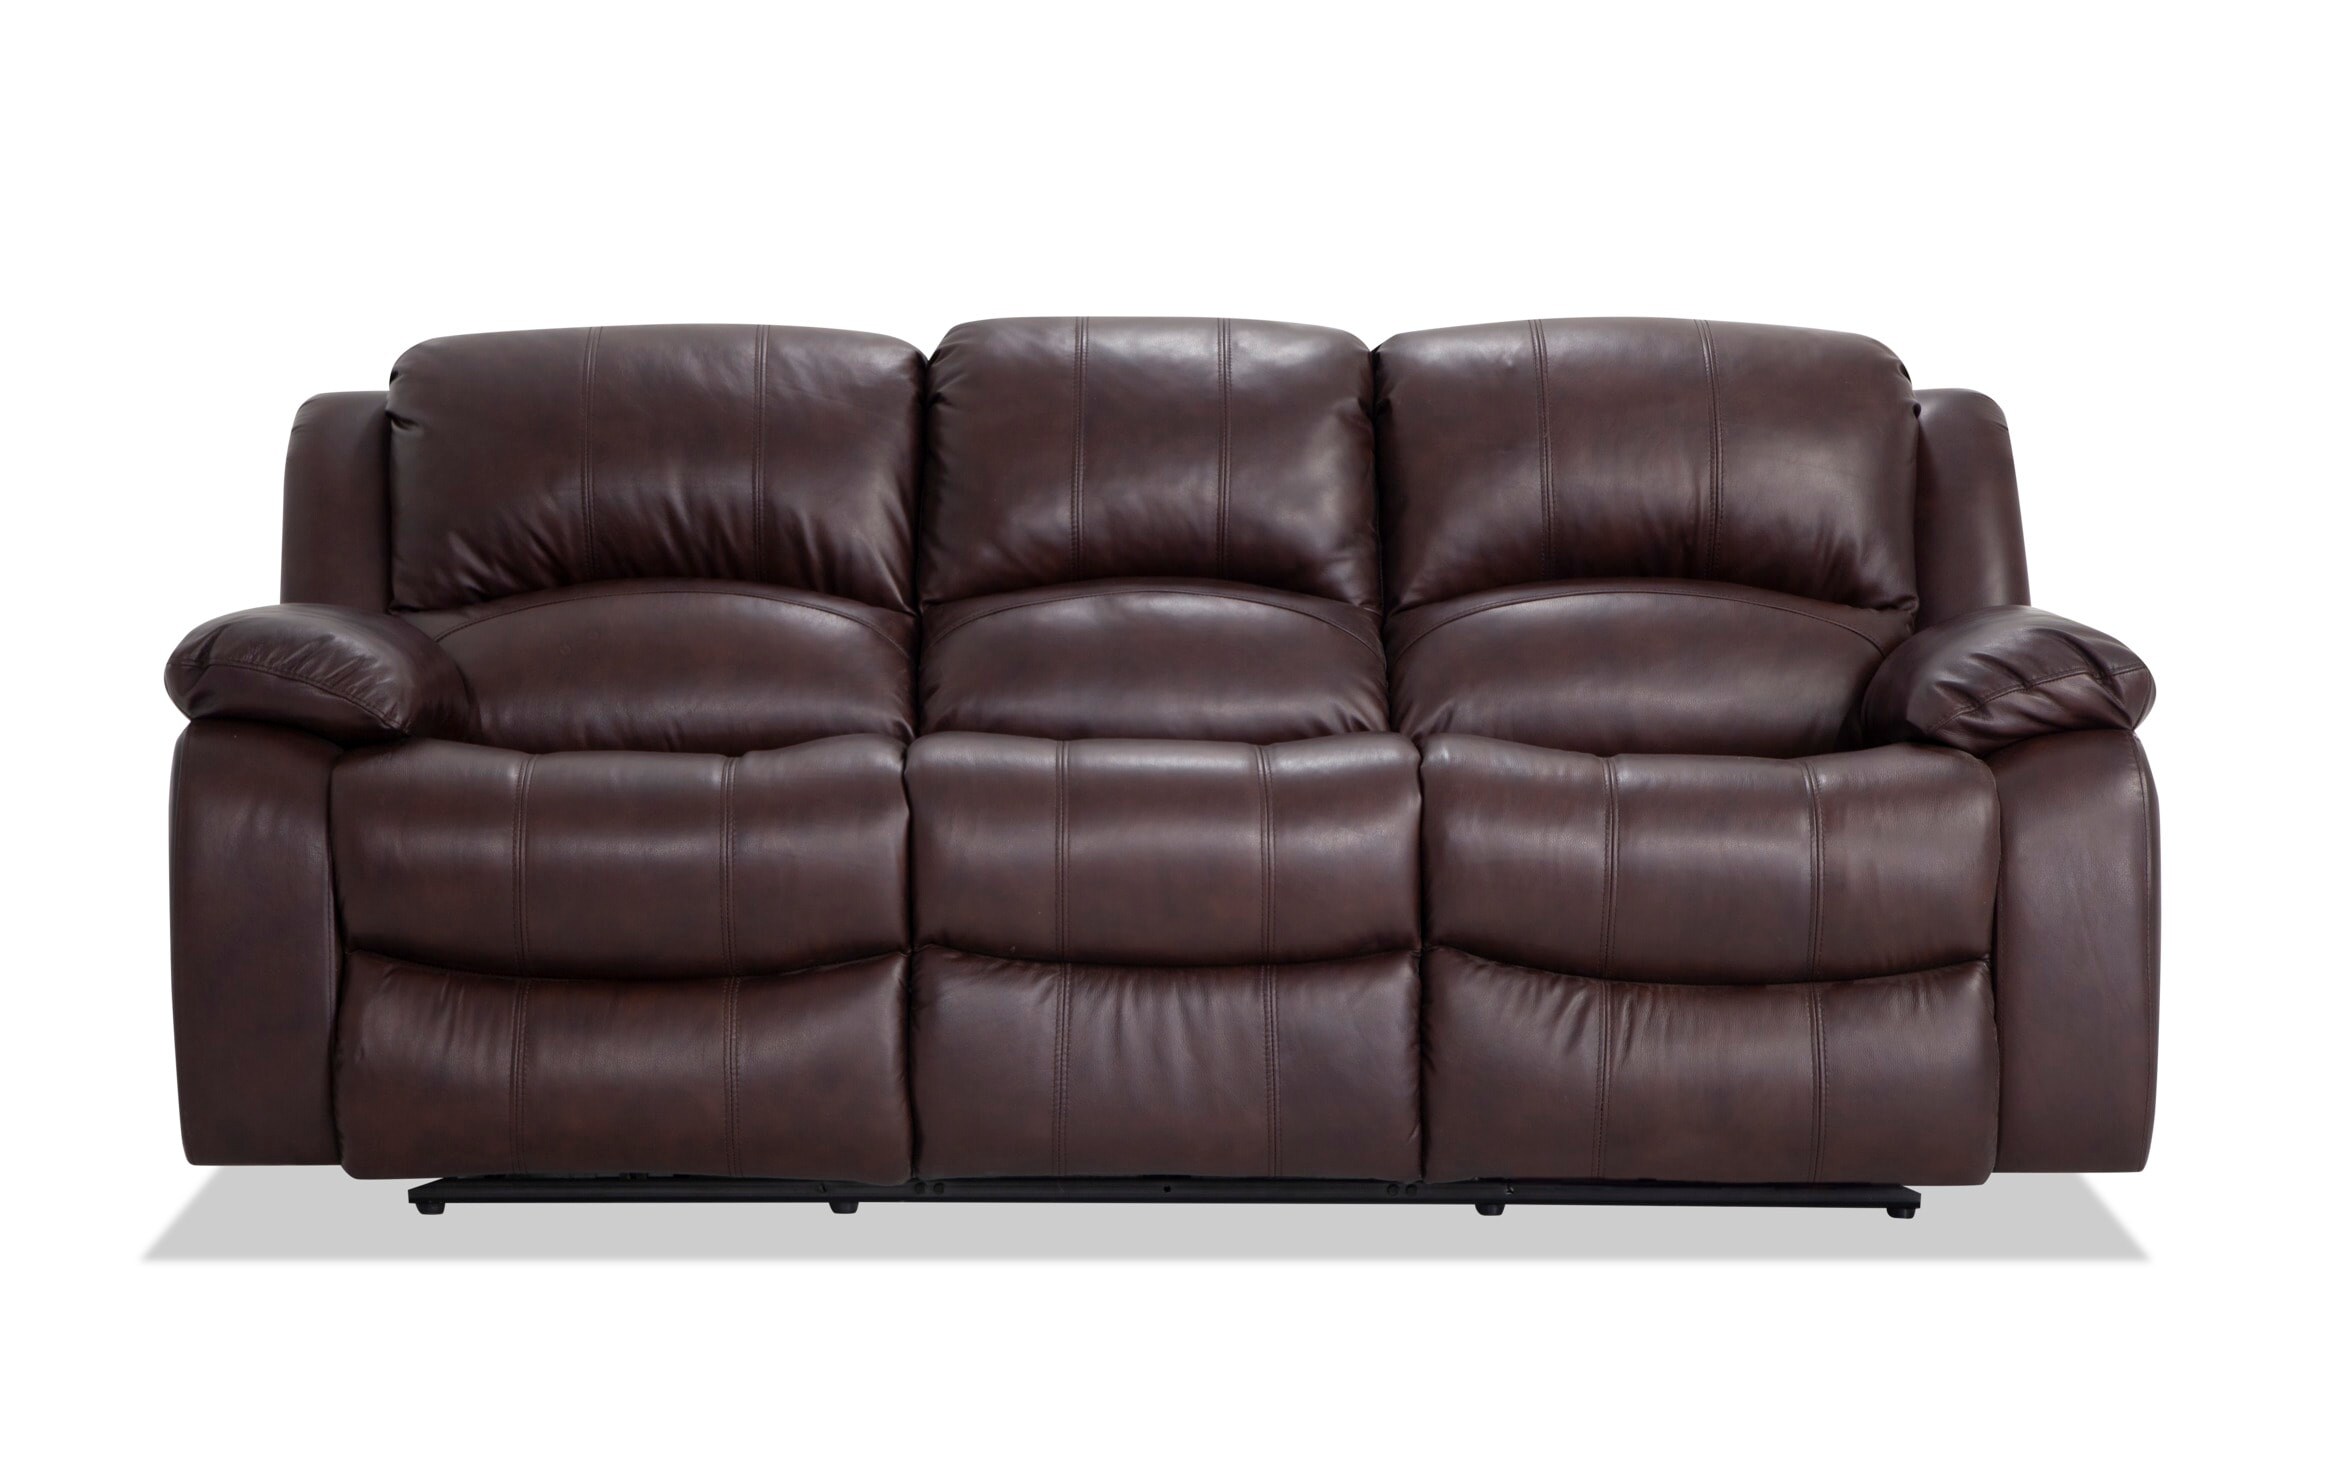 Olympus Brown Leather Power Reclining, Raymour And Flanigan Leather Recliners